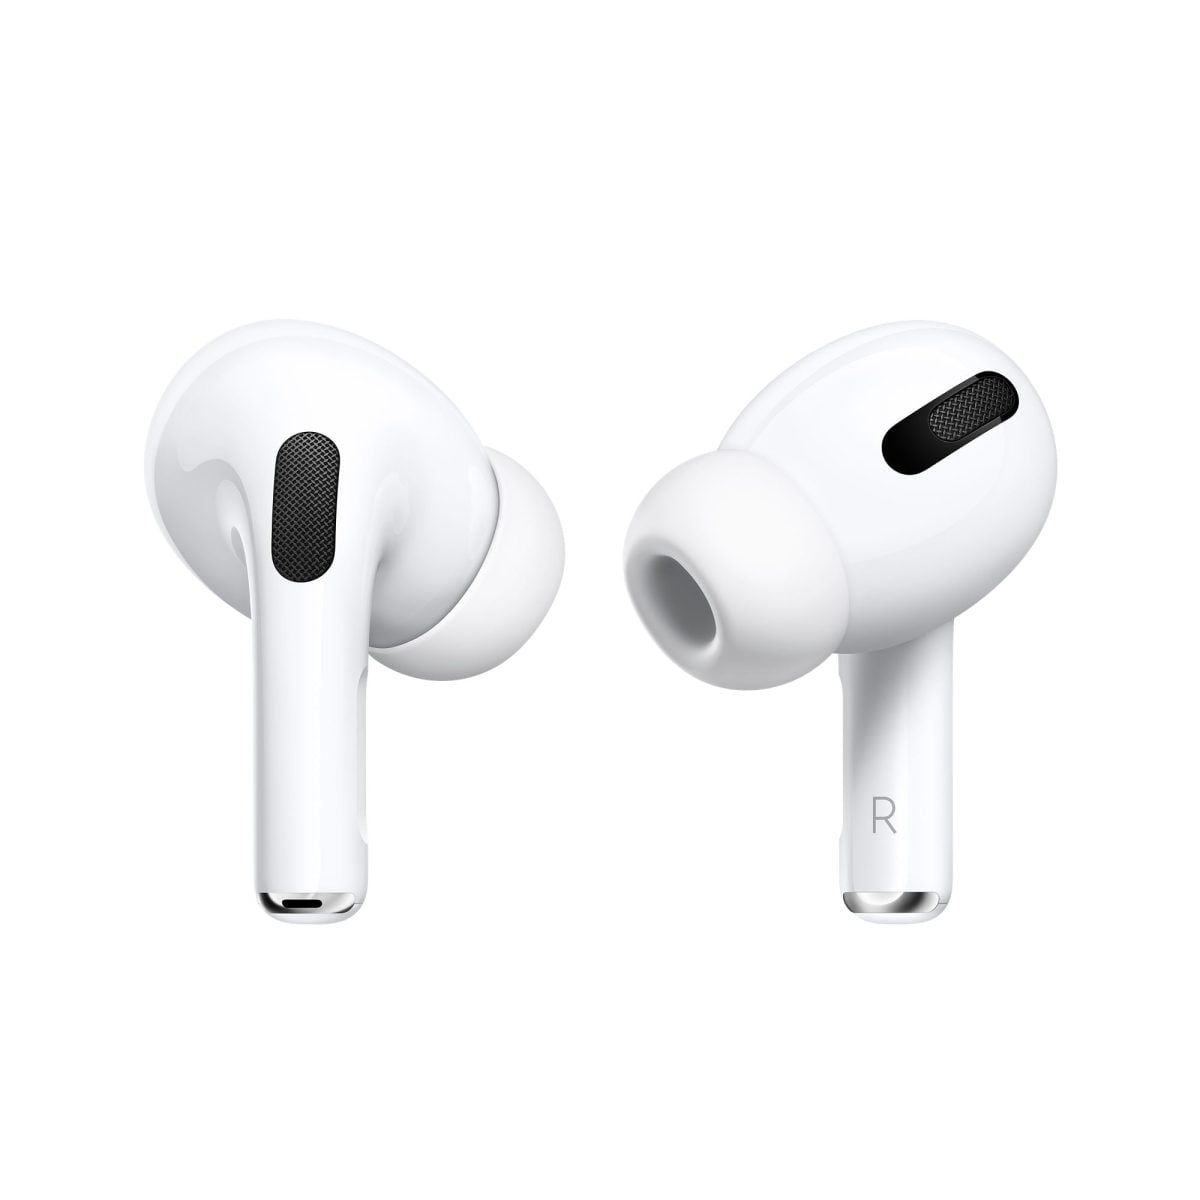 Mwp22 Av1 Apple &Lt;Div Class=&Quot;Rc-Pdsection-Sidepanel Column Large-3 Small-12&Quot;&Gt; &Lt;H1&Gt;Apple Airpods Pro (2Nd Generation) - White Mqd83&Lt;/H1&Gt; &Lt;/Div&Gt; &Lt;Div Class=&Quot;Rc-Pdsection-Mainpanel Column Large-9 Small-12&Quot;&Gt; &Lt;P Class=&Quot;H4-Para-Title&Quot;&Gt;Airpods Pro Feature Up To 2X More Active Noise Cancellation, Plus Adaptive Transparency, And Personalized Spatial Audio With Dynamic Head Tracking For Immersive Sound.² Now With Multiple Ear Tips (Xs, S, M, L) And Up To 6 Hours Of Listening Time.&Lt;/P&Gt; &Lt;/Div&Gt; Airpods Pro Apple Airpods Pro (2Nd Generation) - White Mqd83